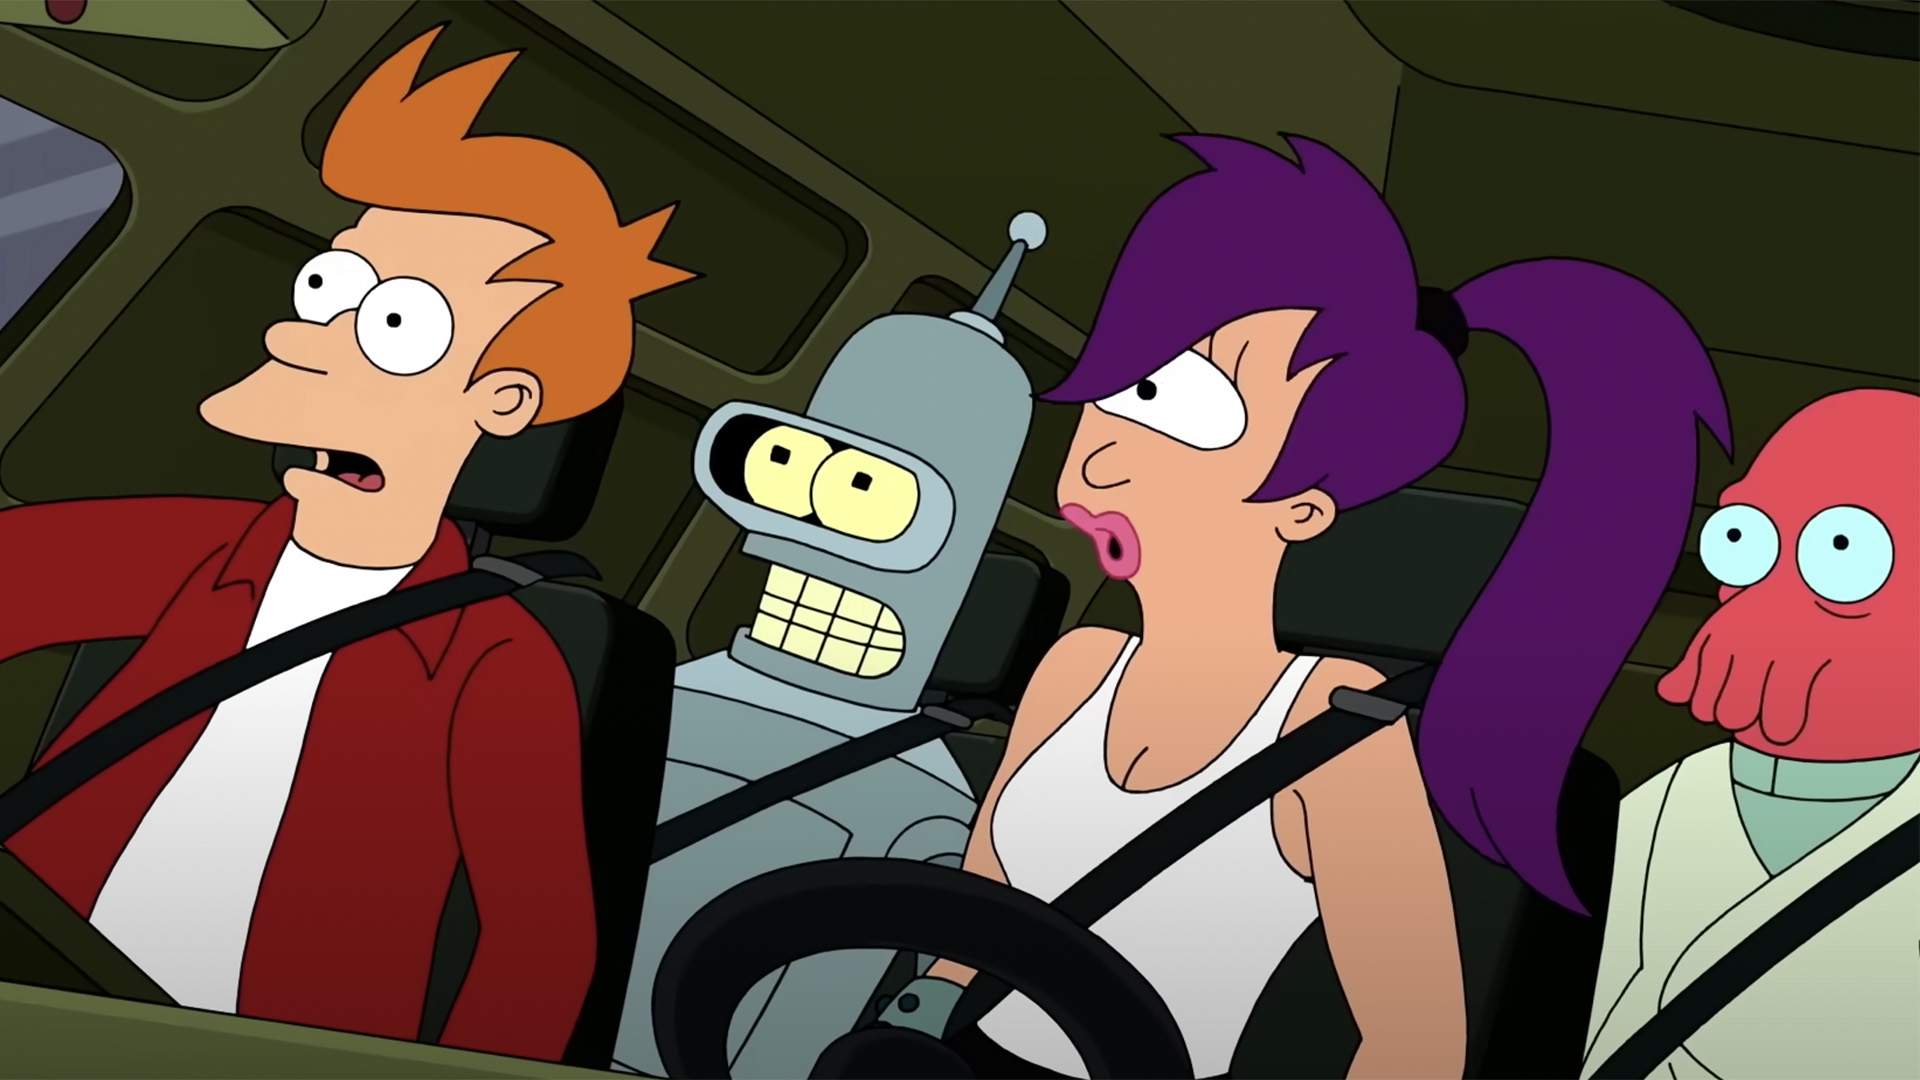 Shut Up and Take My Money: The Newly Defrosted and Still-Hilarious 'Futurama' Is Back in Vintage Form